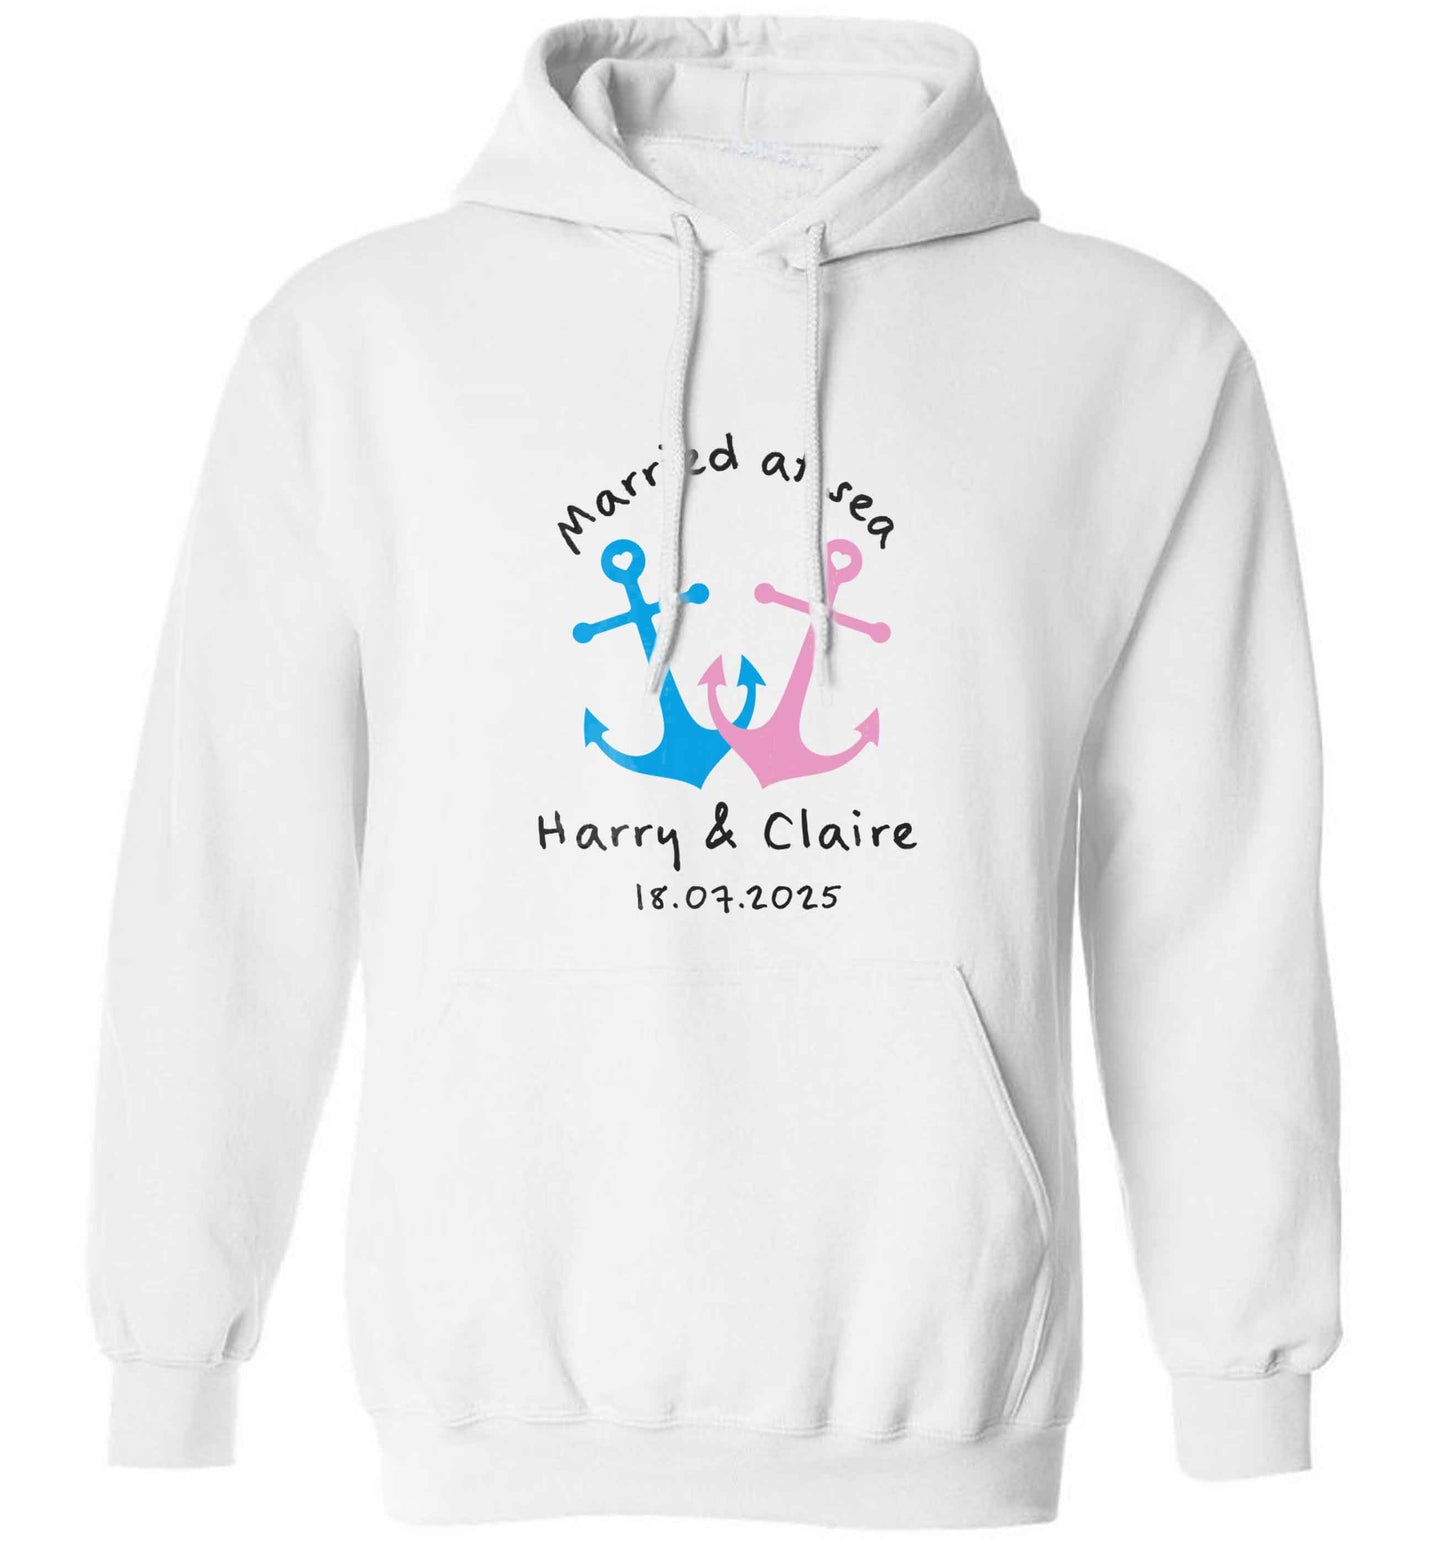 Married at sea adults unisex white hoodie 2XL